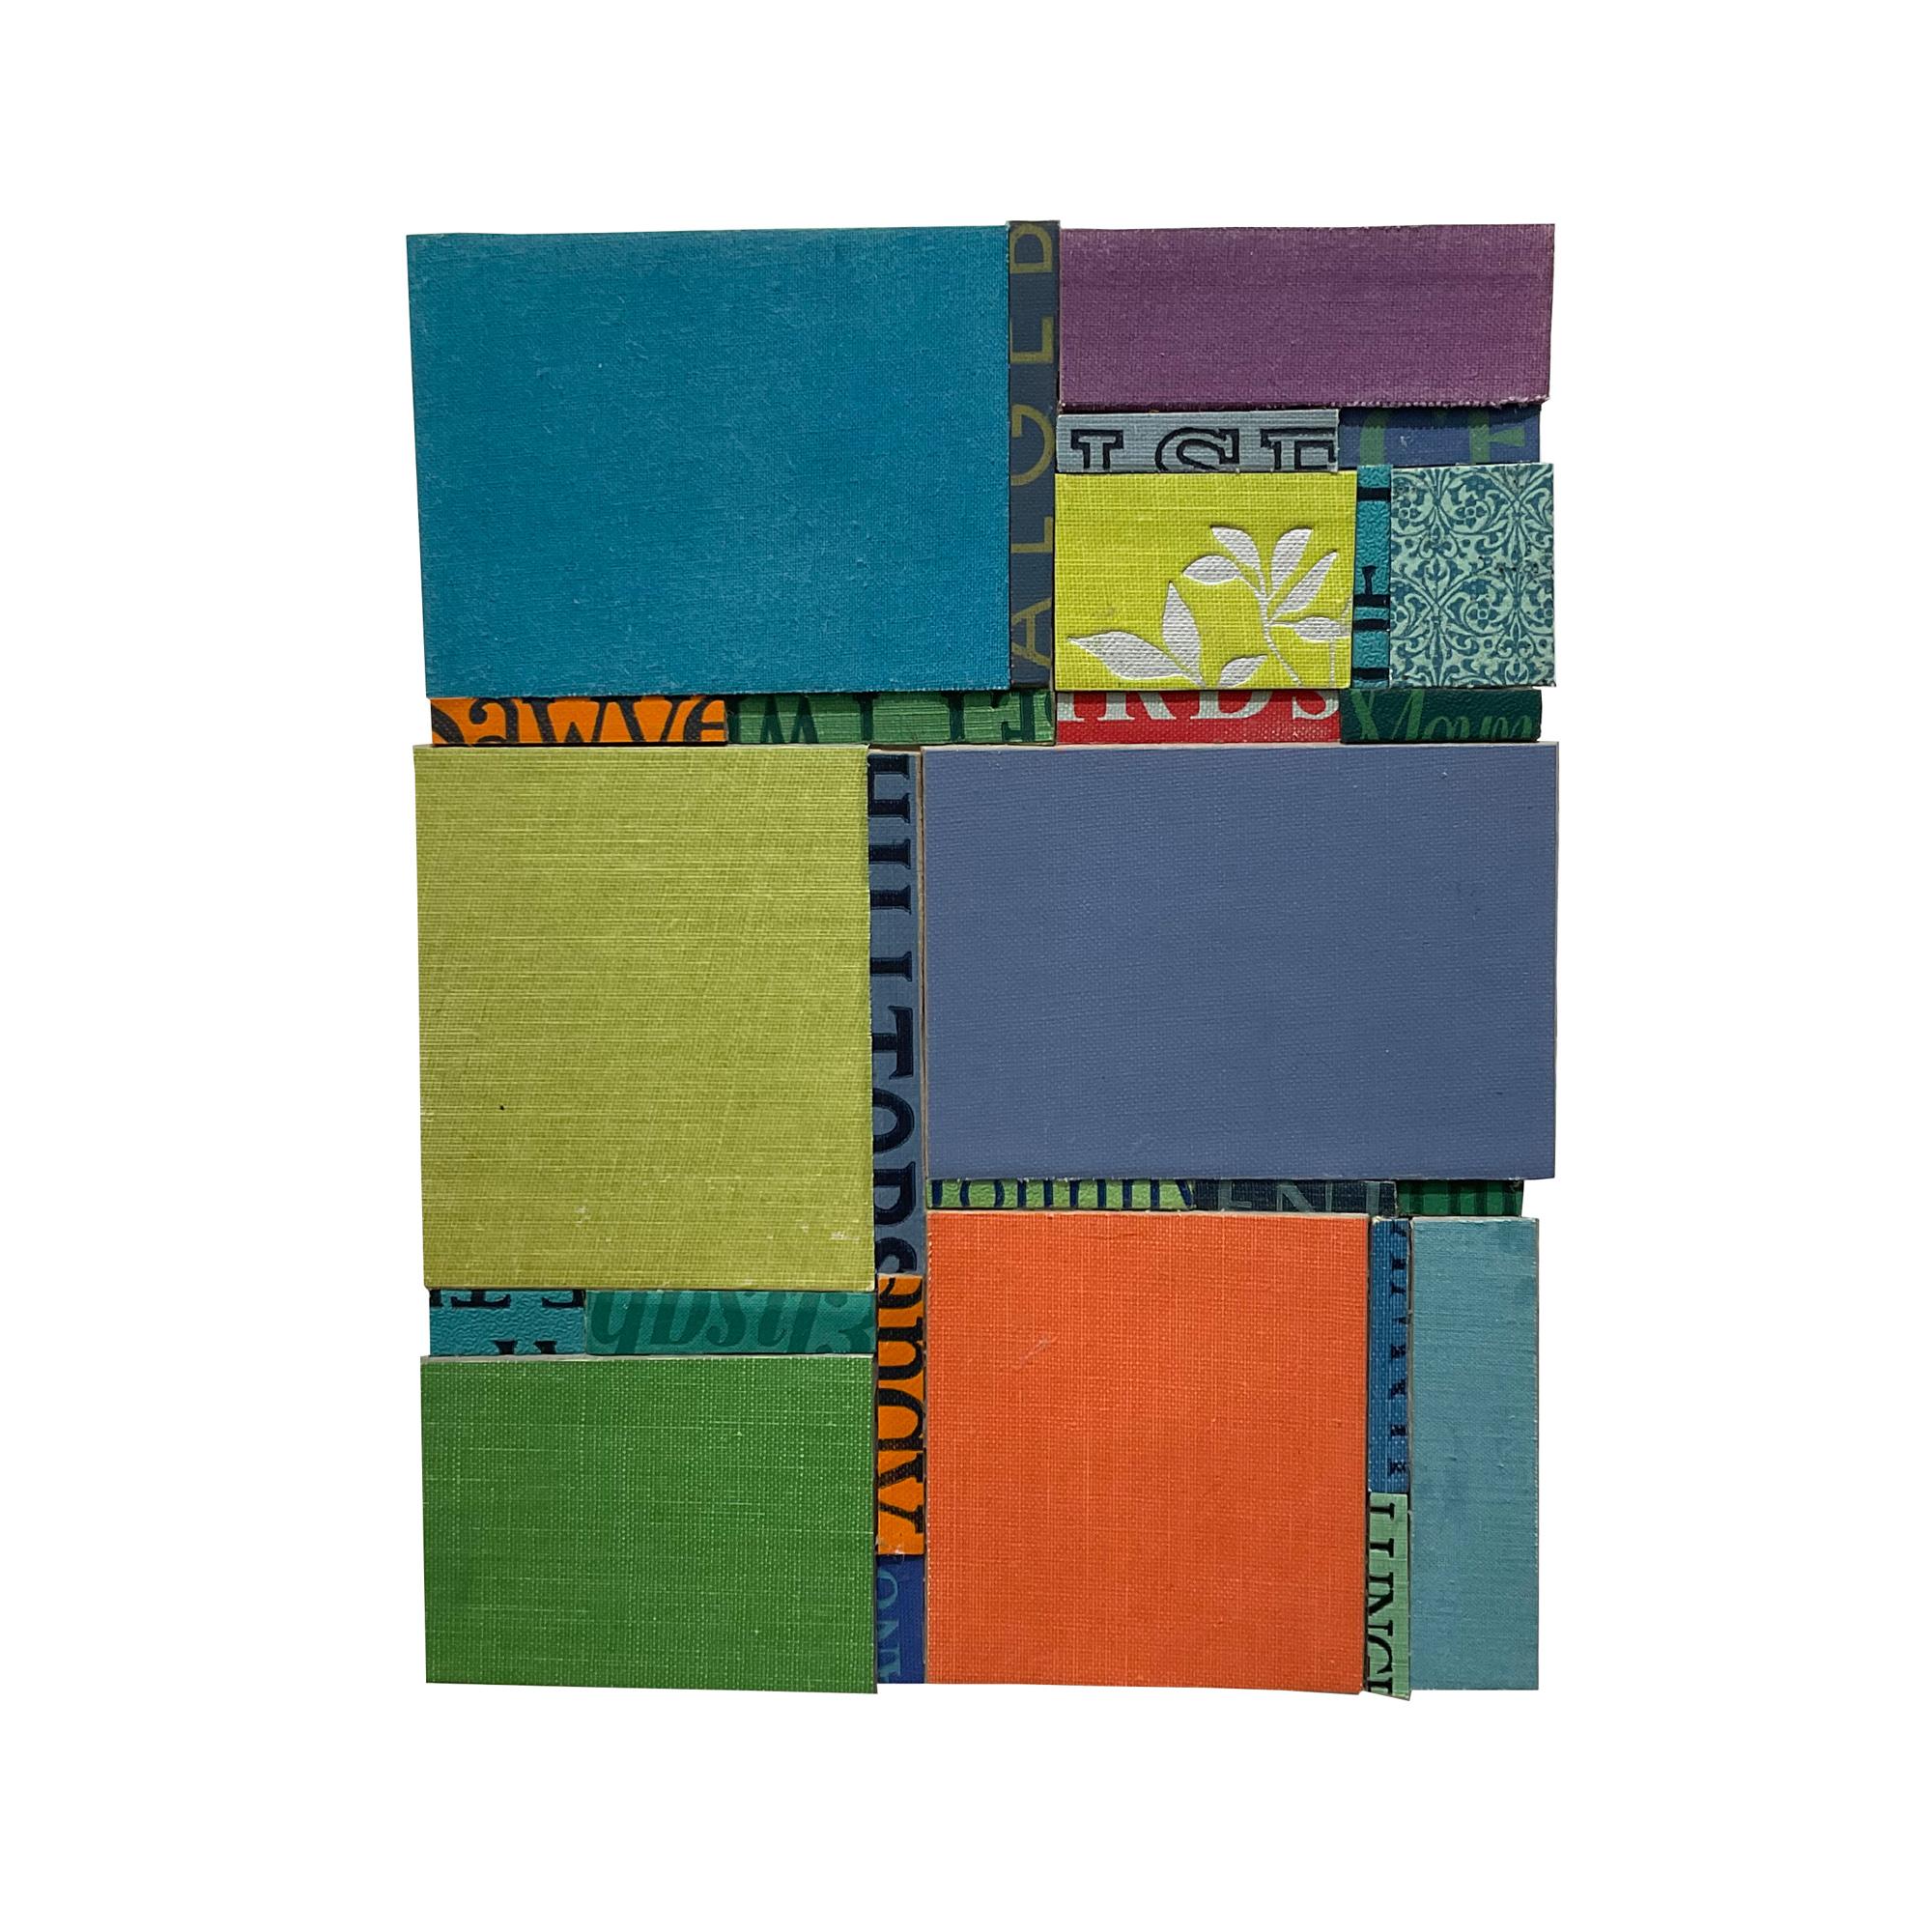 "Colorblocks" is a colorful contemporary abstract hardcover book collage on wood panel by San Carlos, CA based artist, Kerith Lisi. This vibrant piece features an array of rectangular book cover pieces in tones of green, blue-green, orange, and